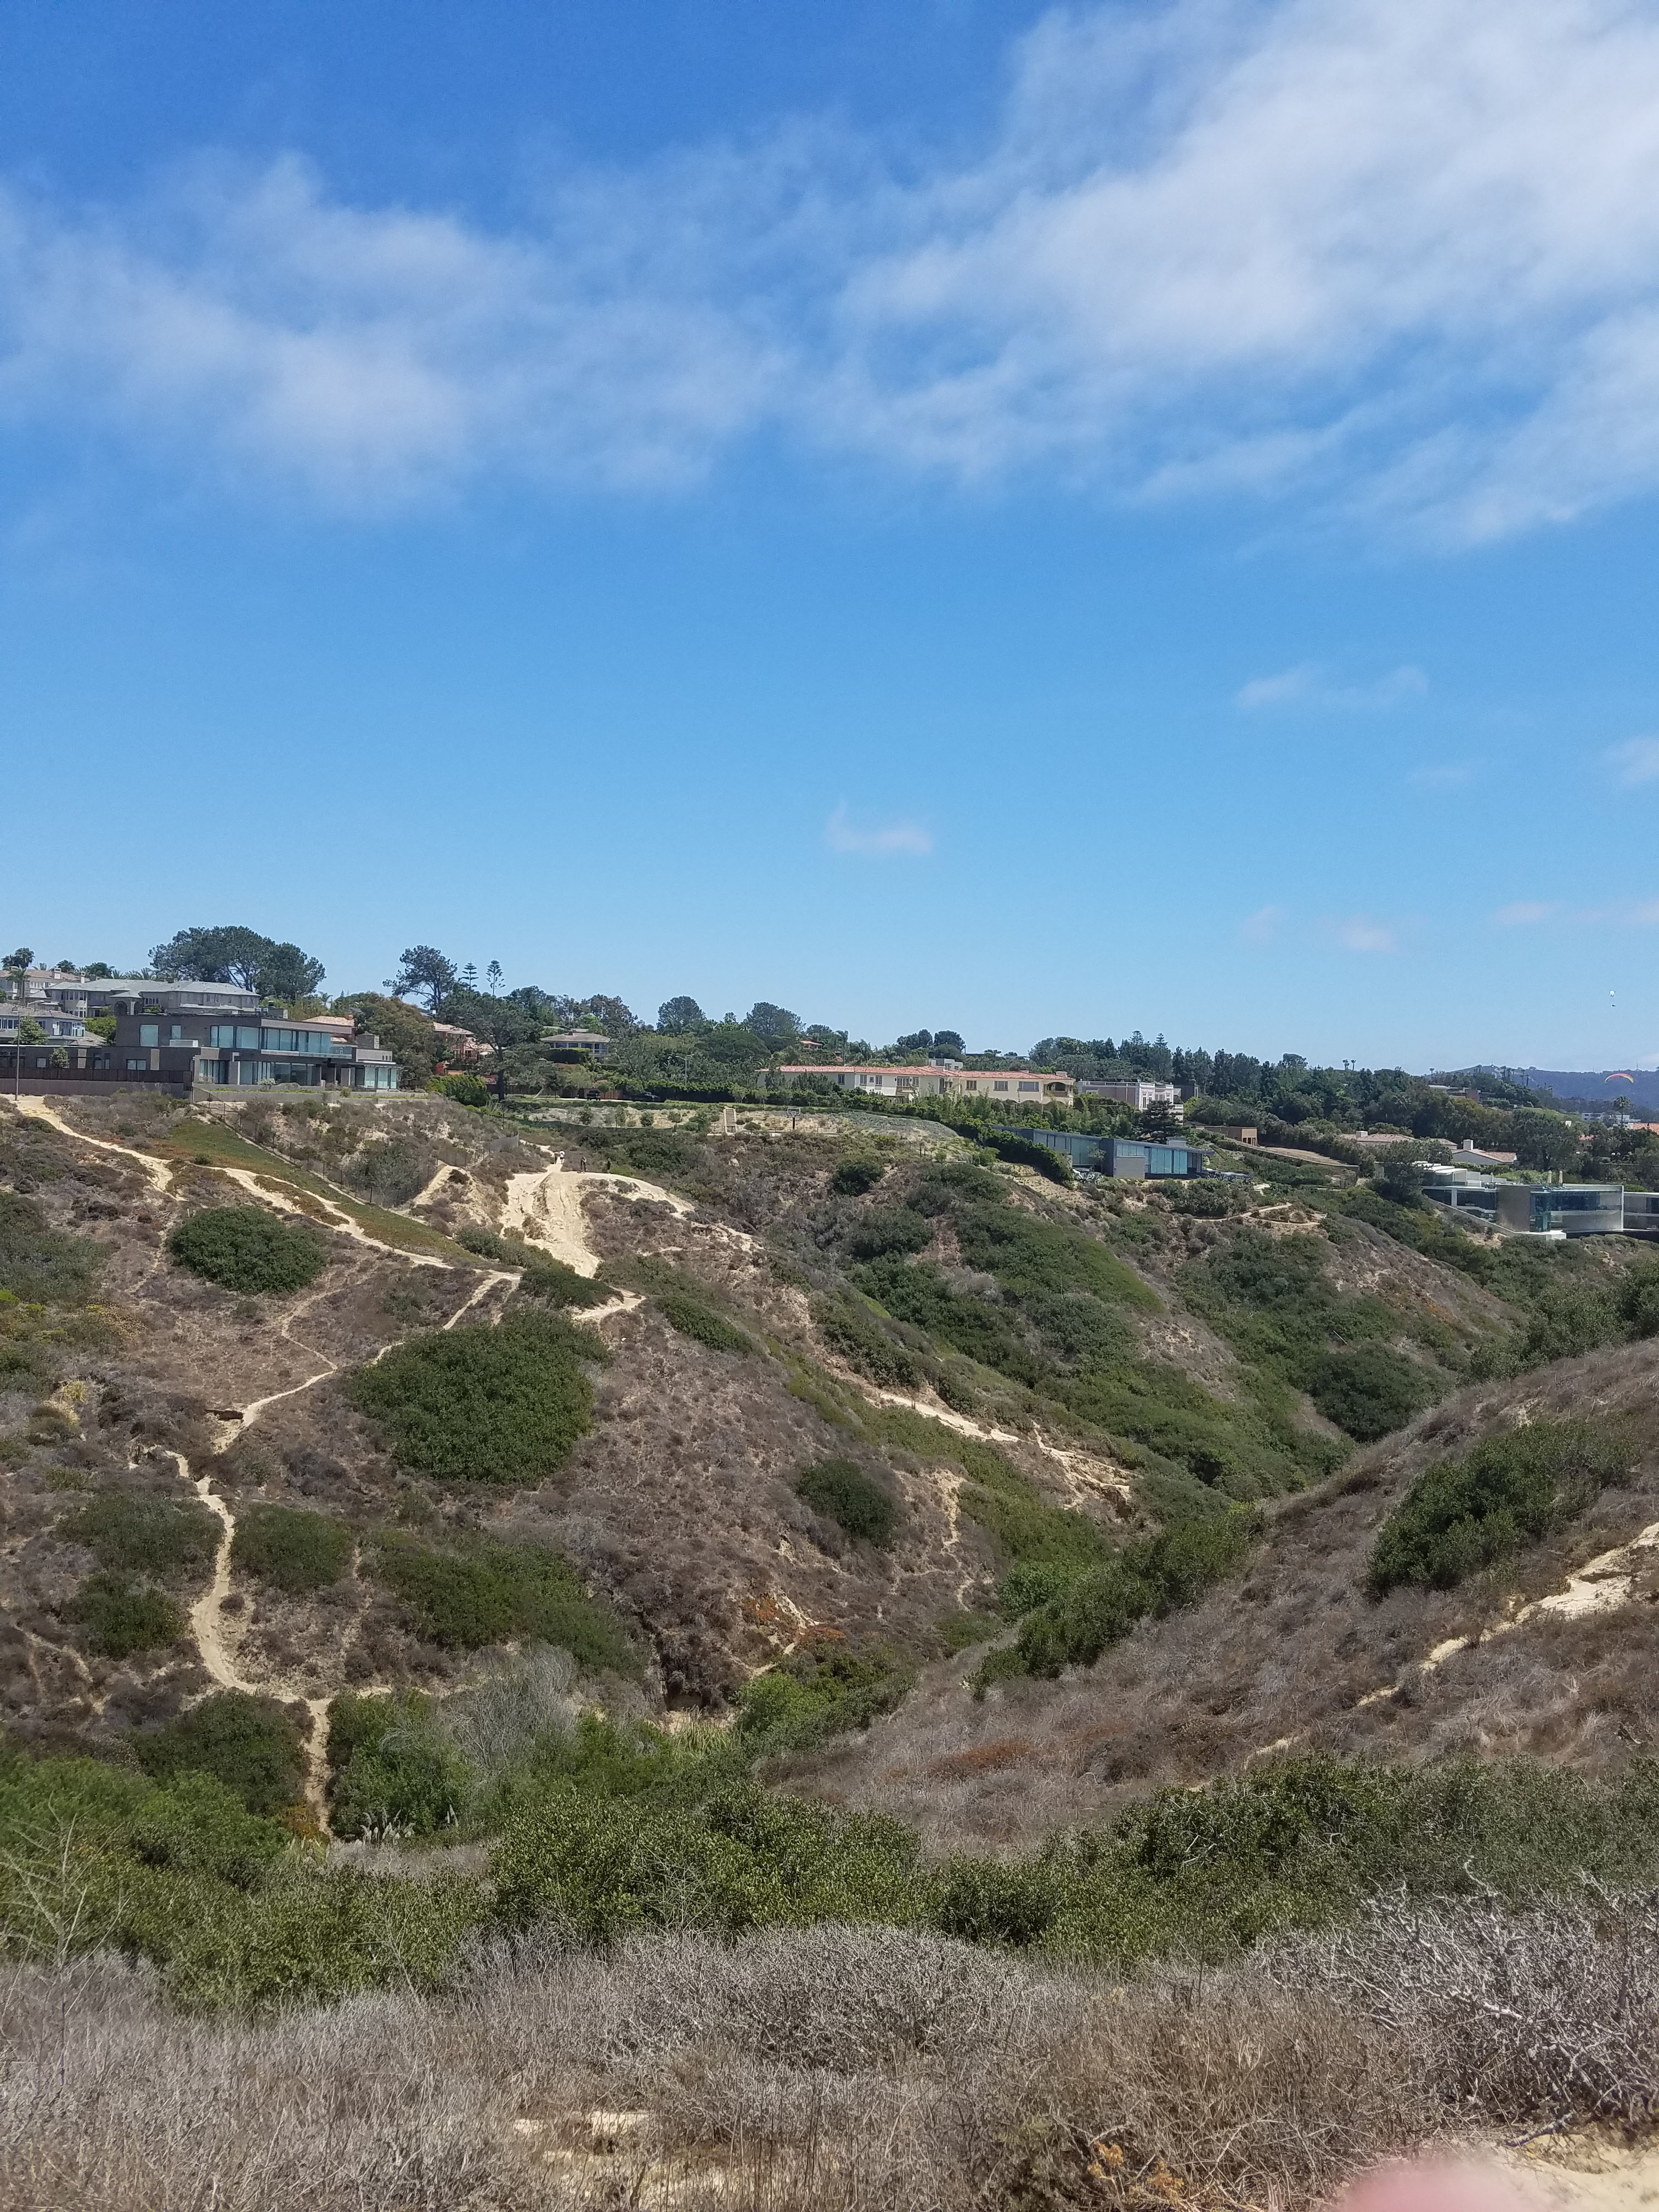 https://fundiegofamily.com/san-diego-fun/san-diego-travel-yes-you-can-go-to-torrey-pines-gliderport-and-keep-your-clothes-on/